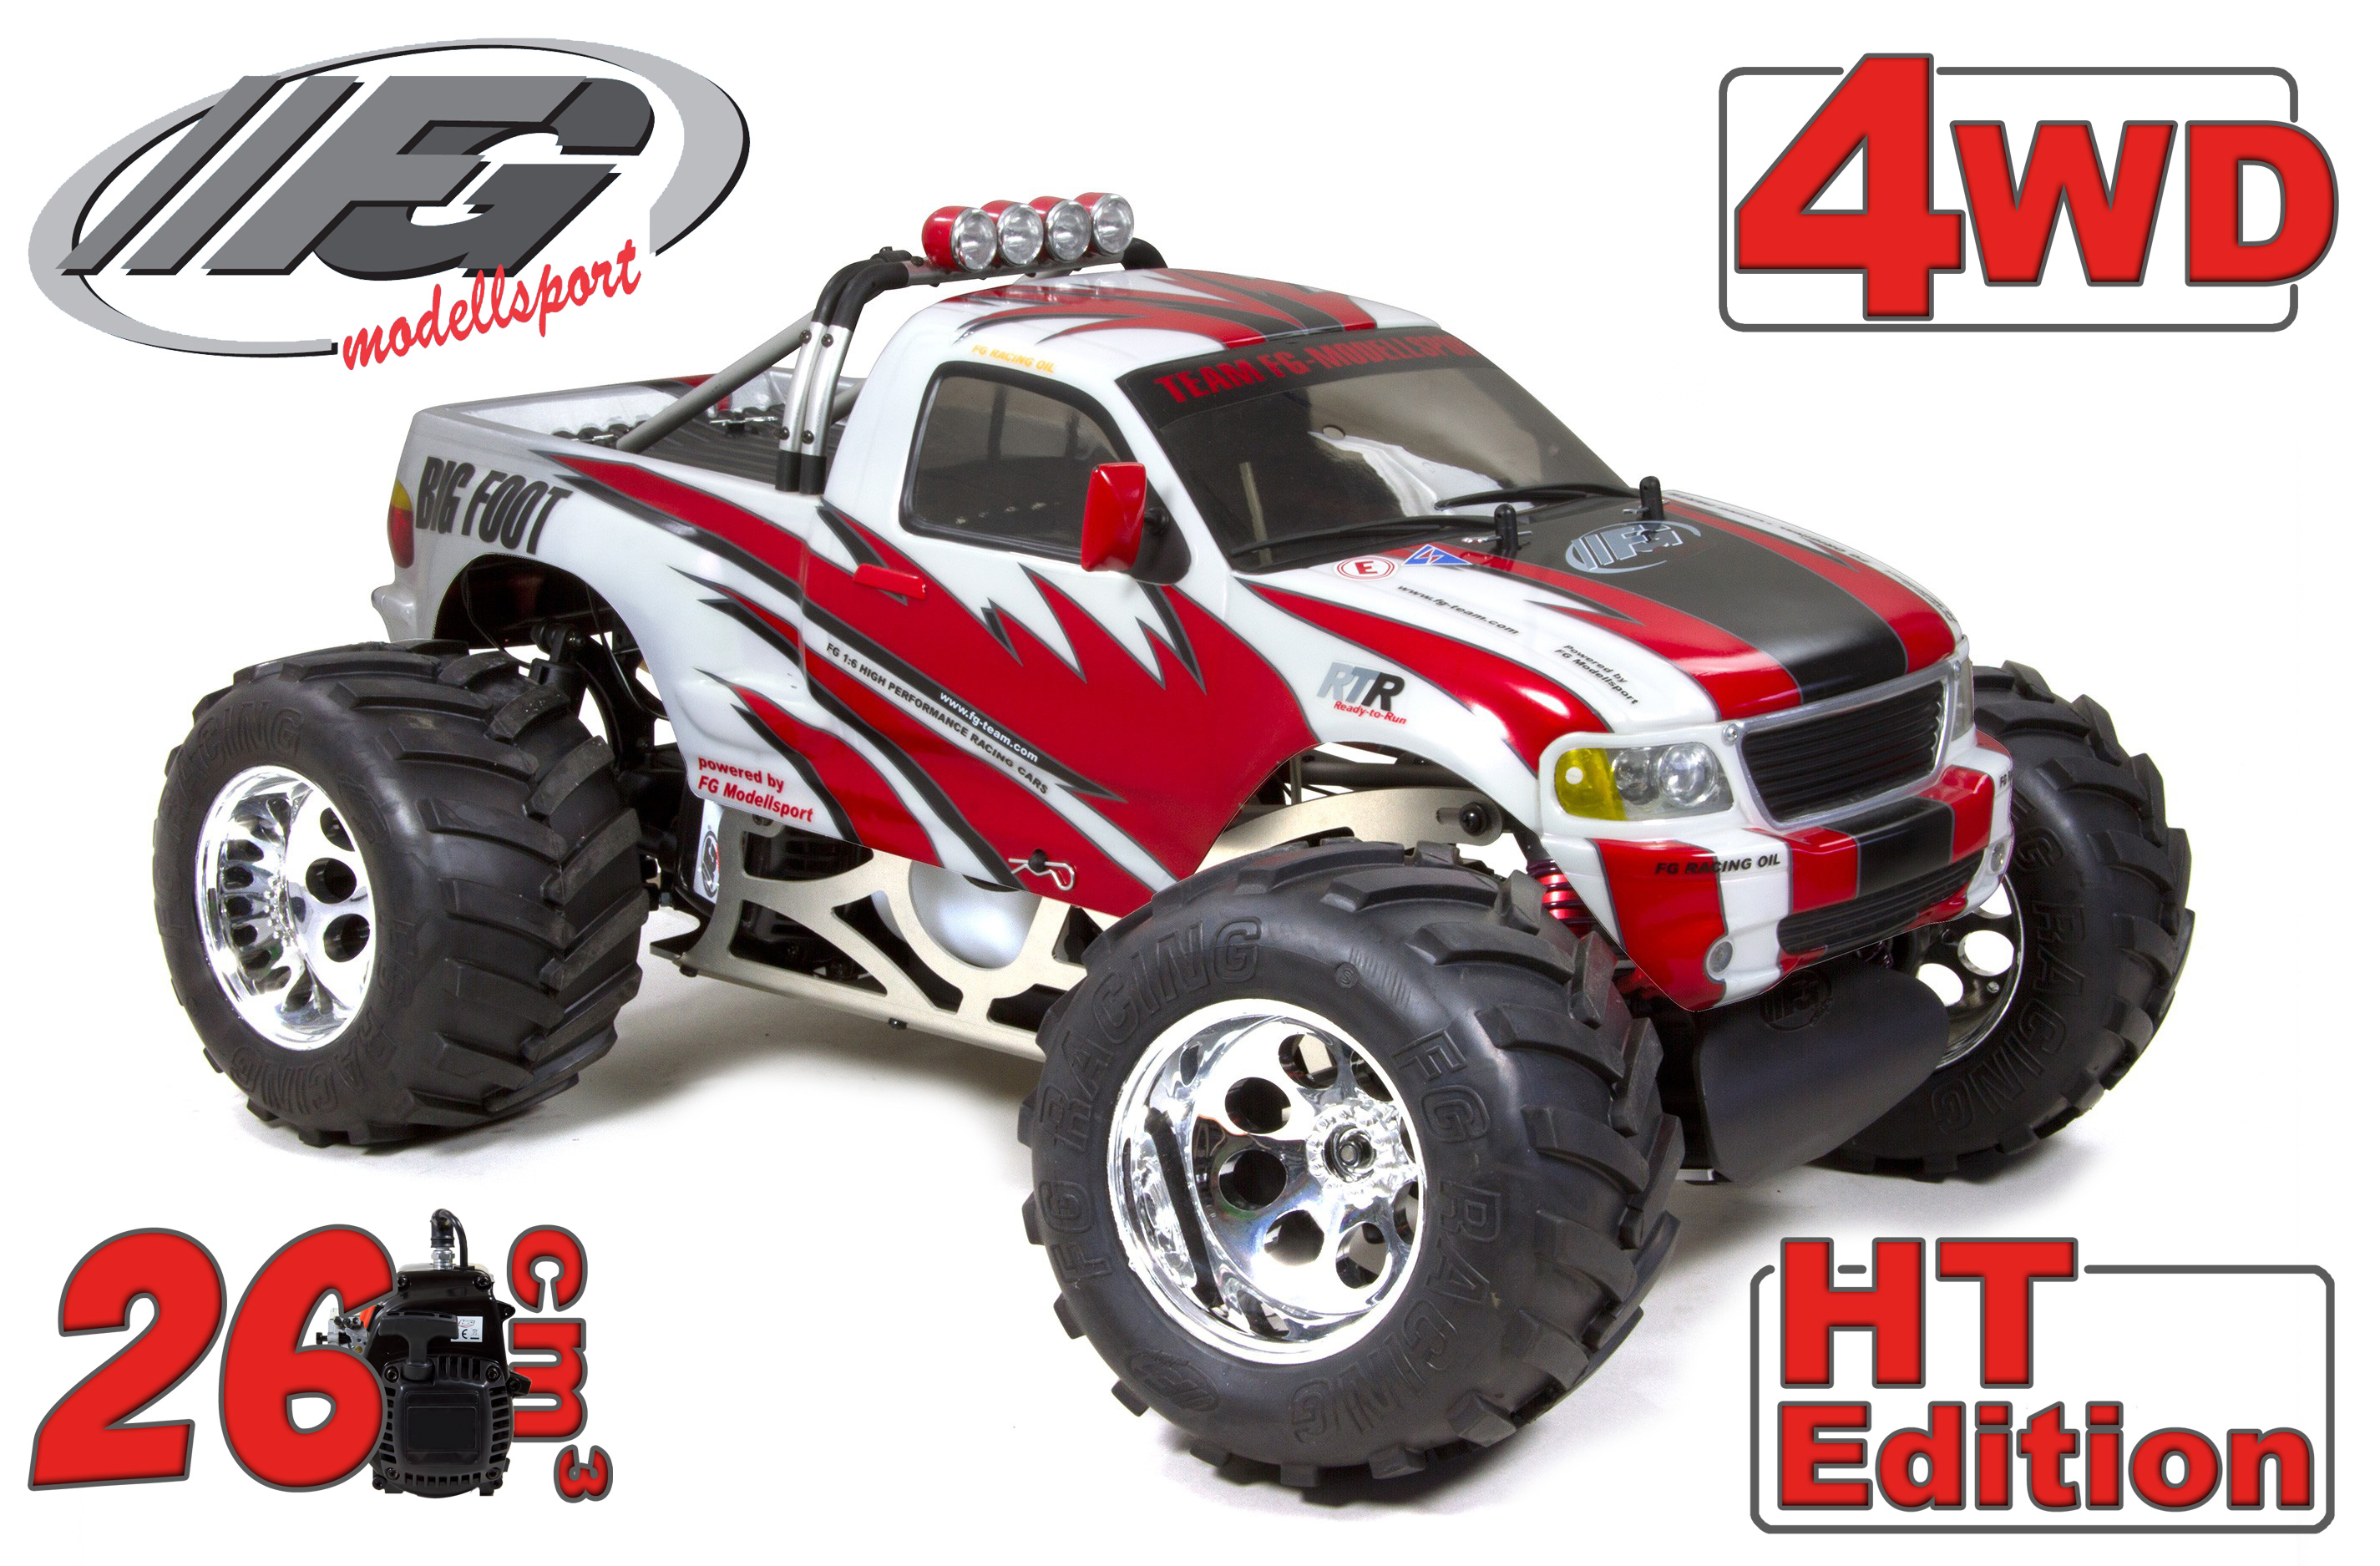 FG Monster Truck WB535 4WD HT-Edition with painted Body Shell